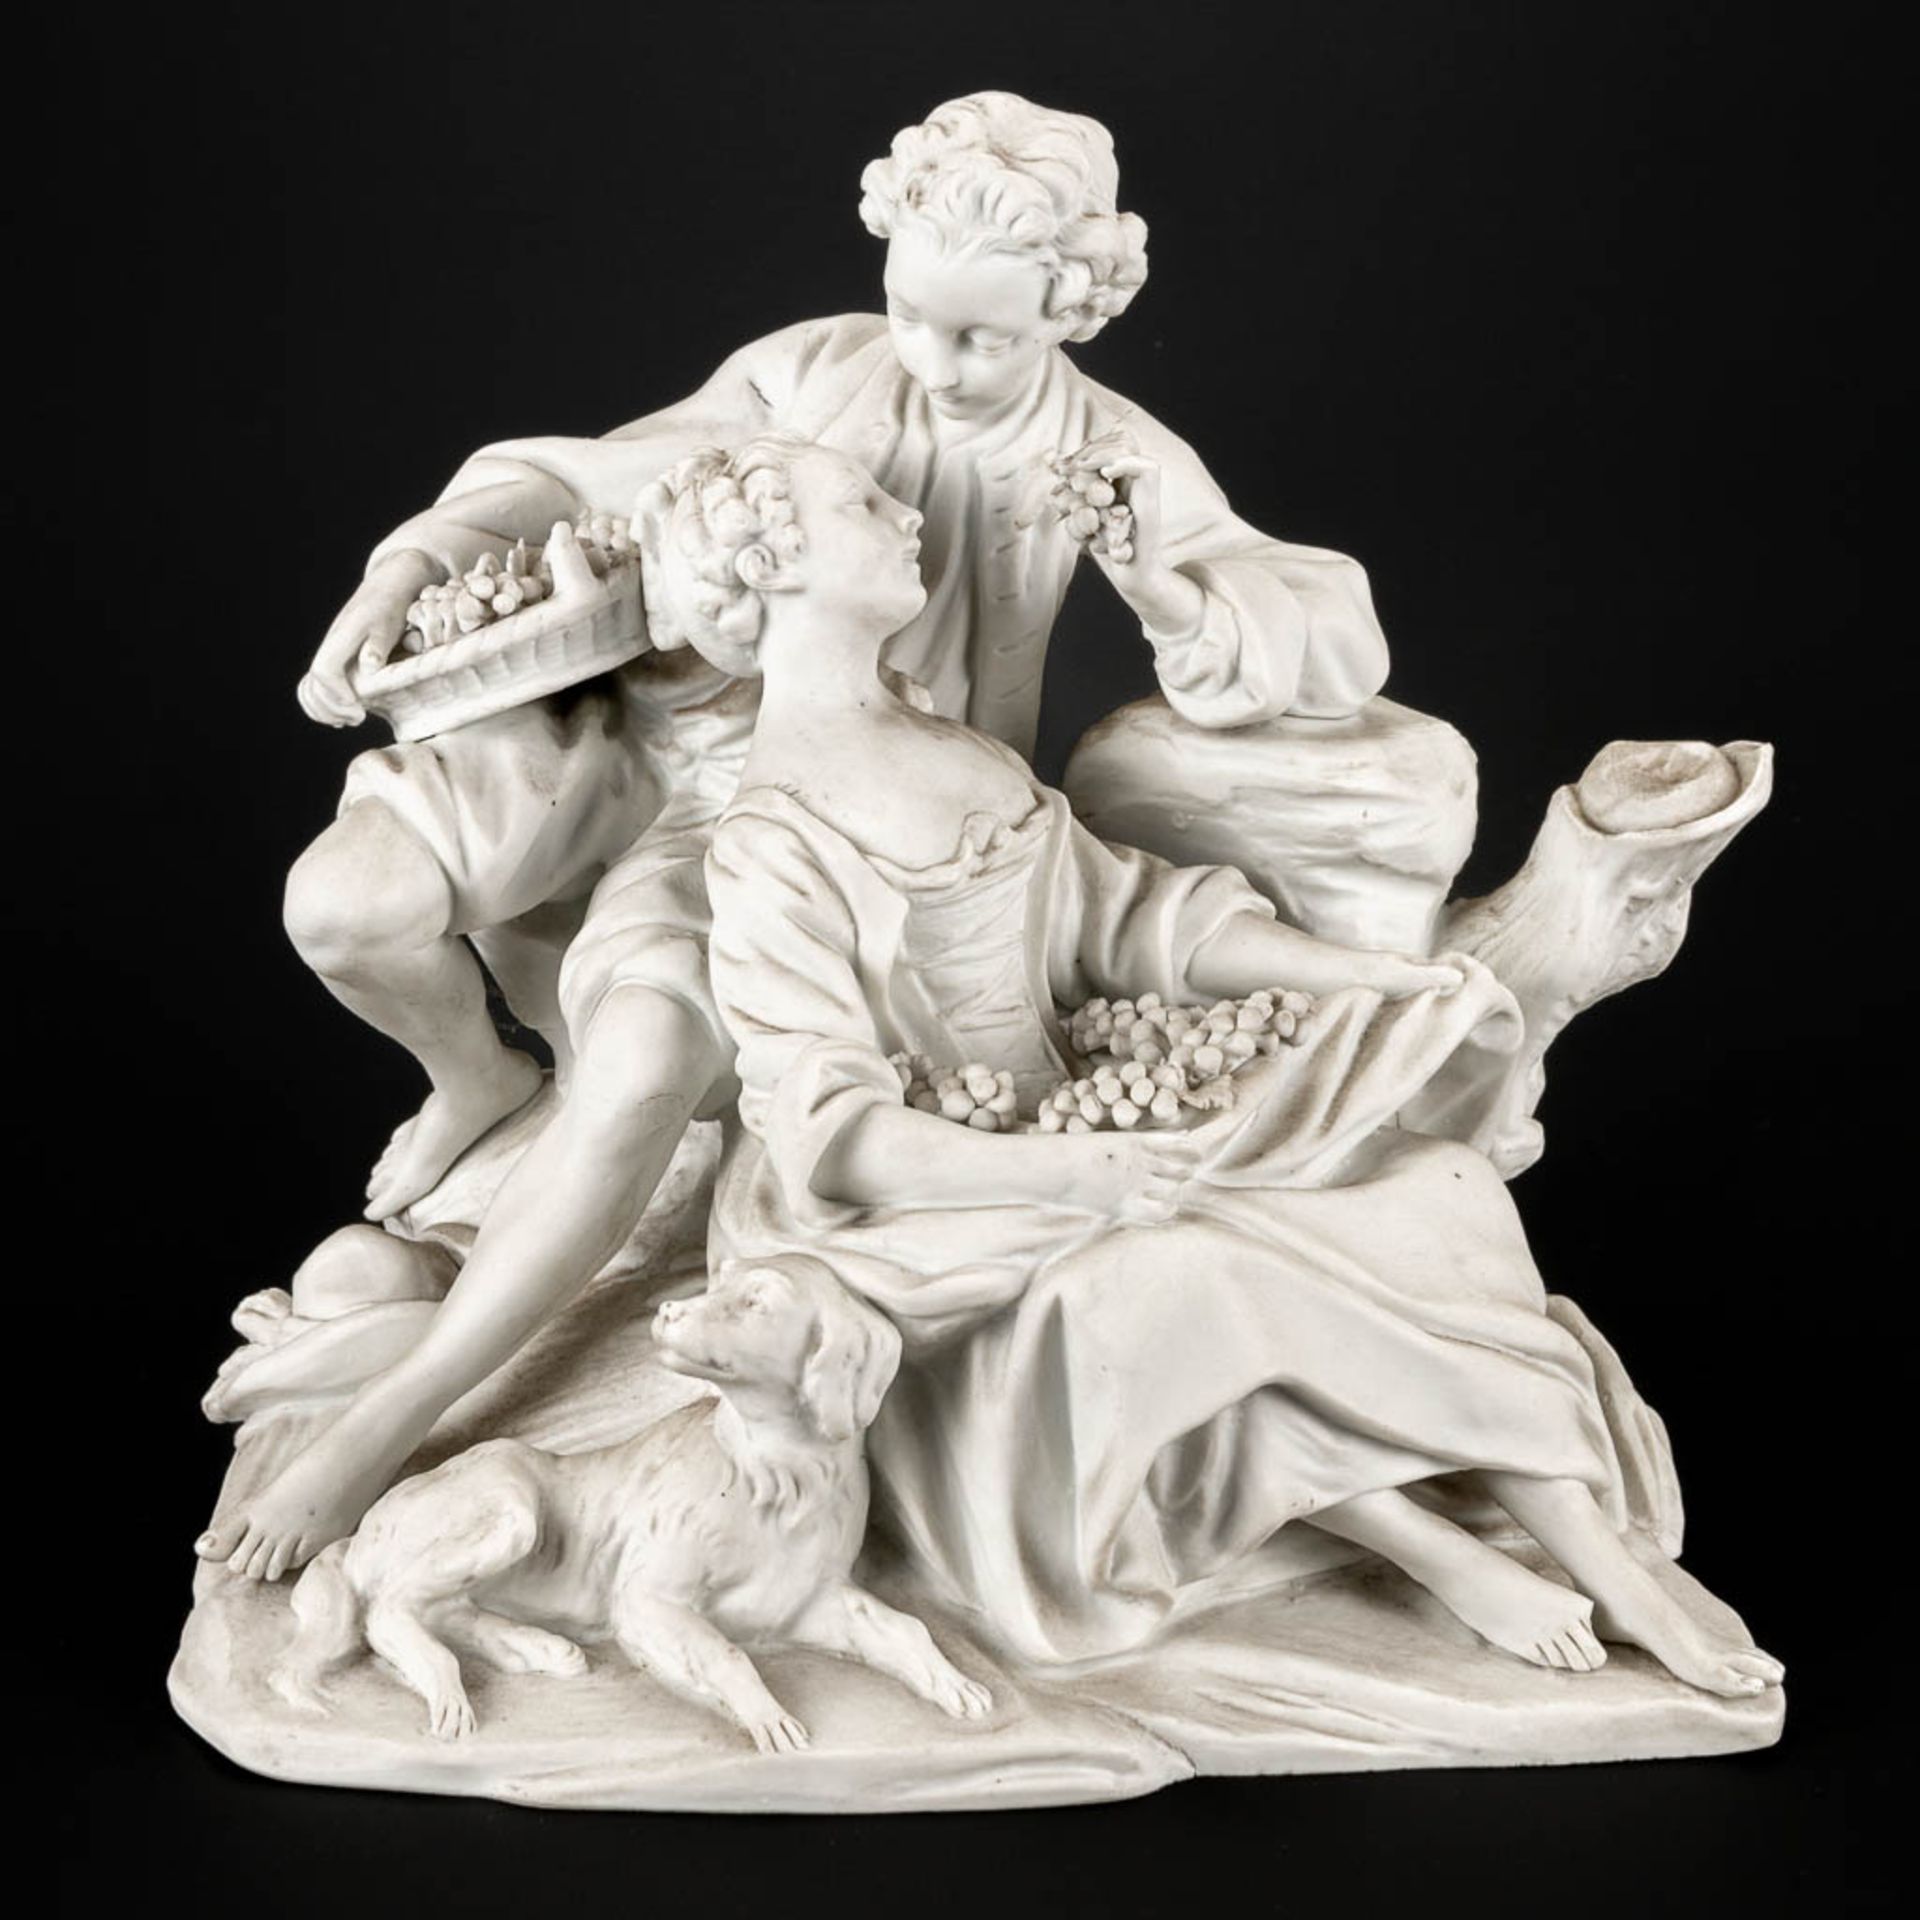 A romantic scene made of biscuit porcelain and marked Sevres. 19th century. (17 x 23 x 22 cm) - Image 4 of 20